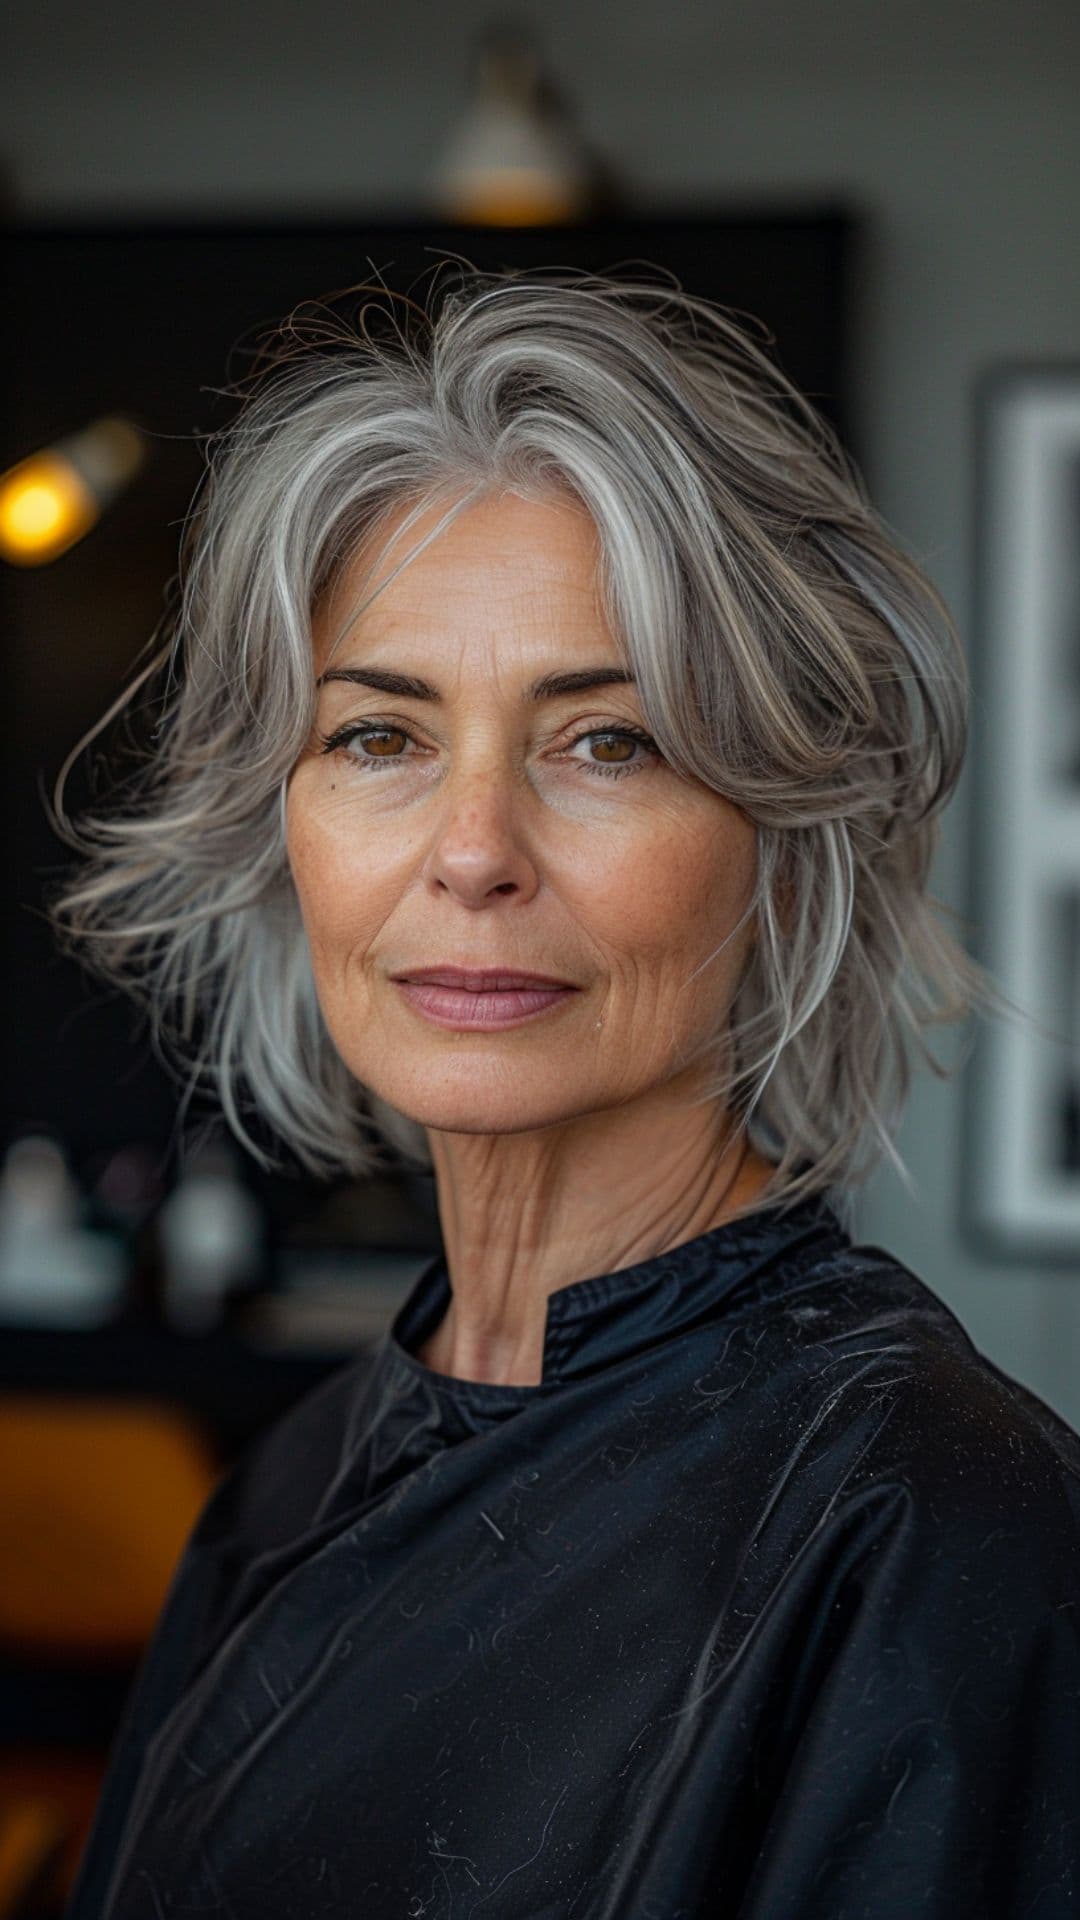 An old woman modelling a silver highlights on dark hair.